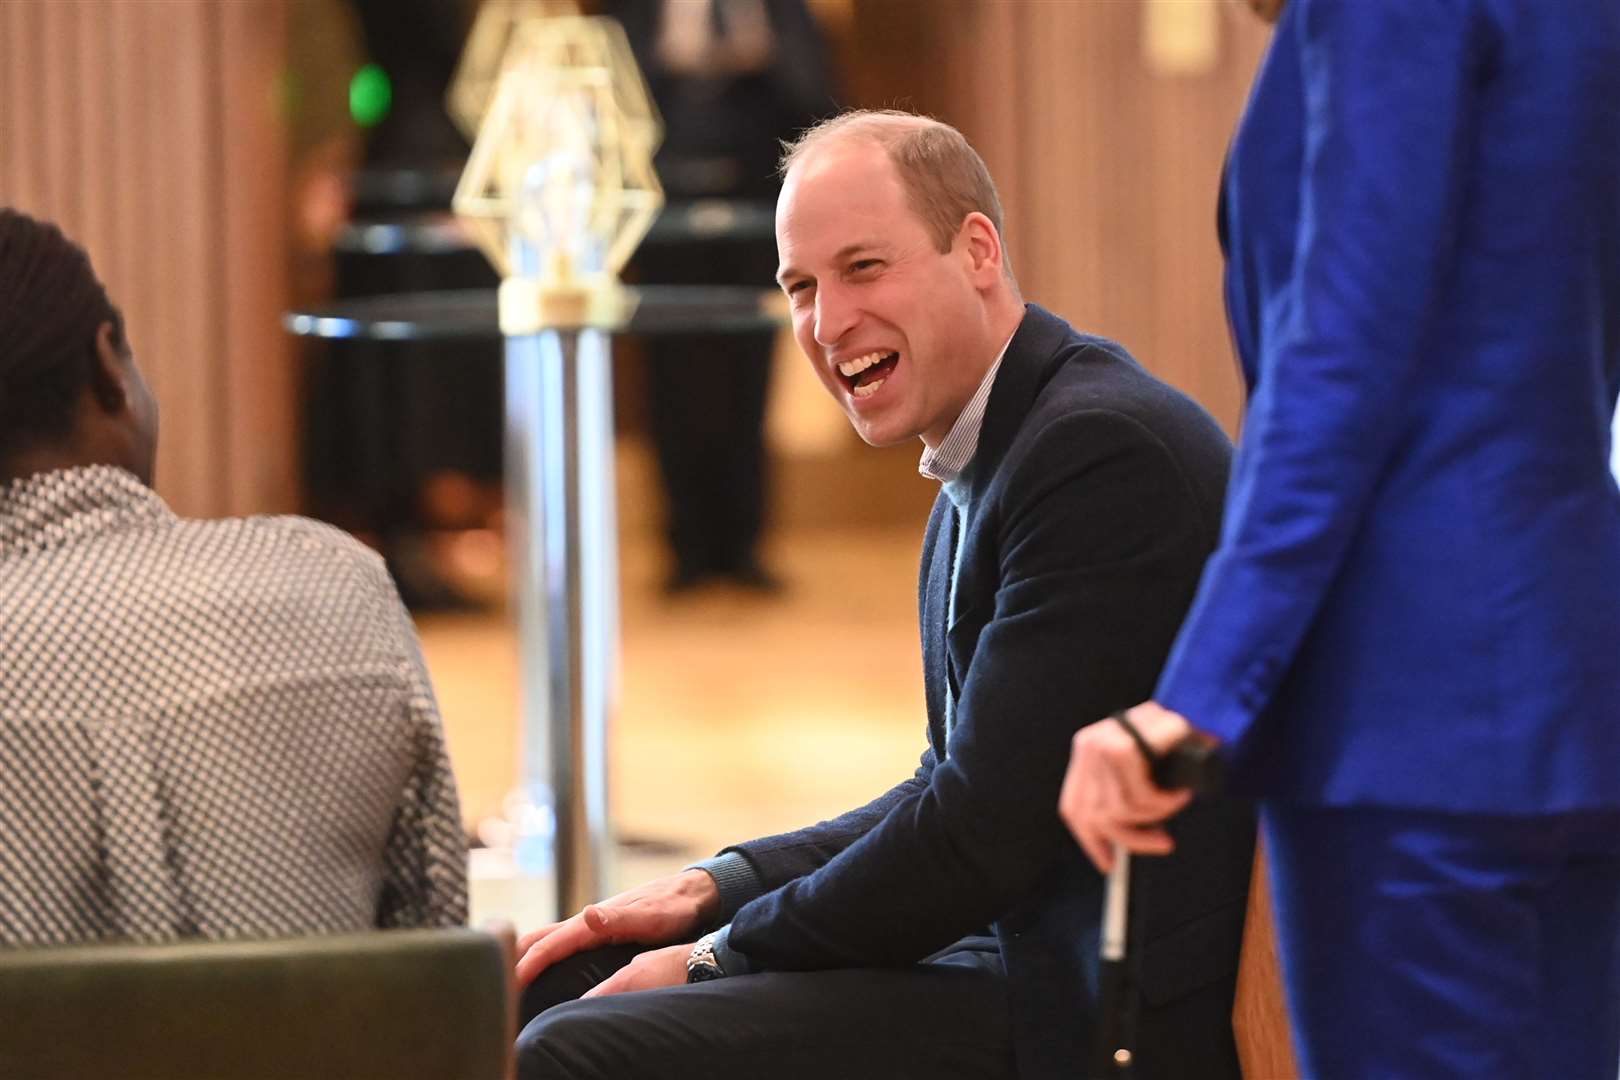 The Duke of Cambridge shares a joke during his visit to Bafta’s HQ (Paul Grover/Daily Telegraph/PA)